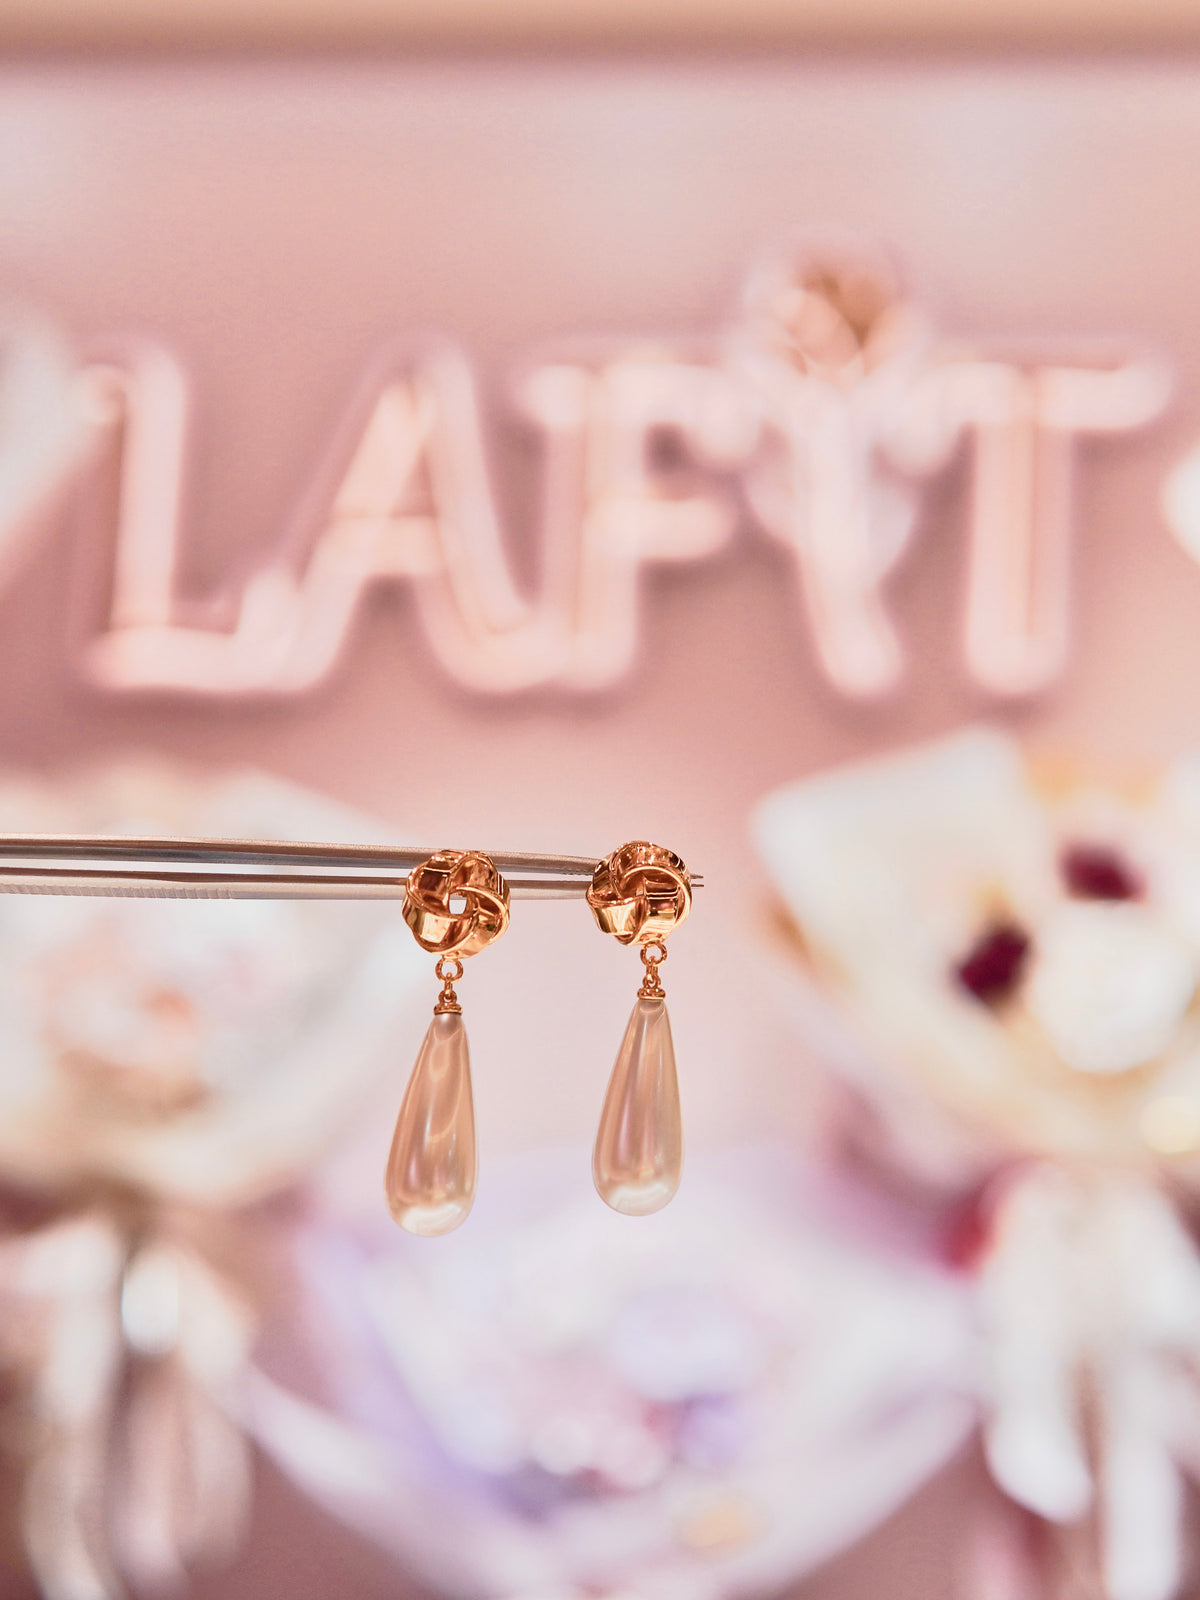 LAFIT· Knot of Miracle - Earrings 法式宮廷珍珠耳環